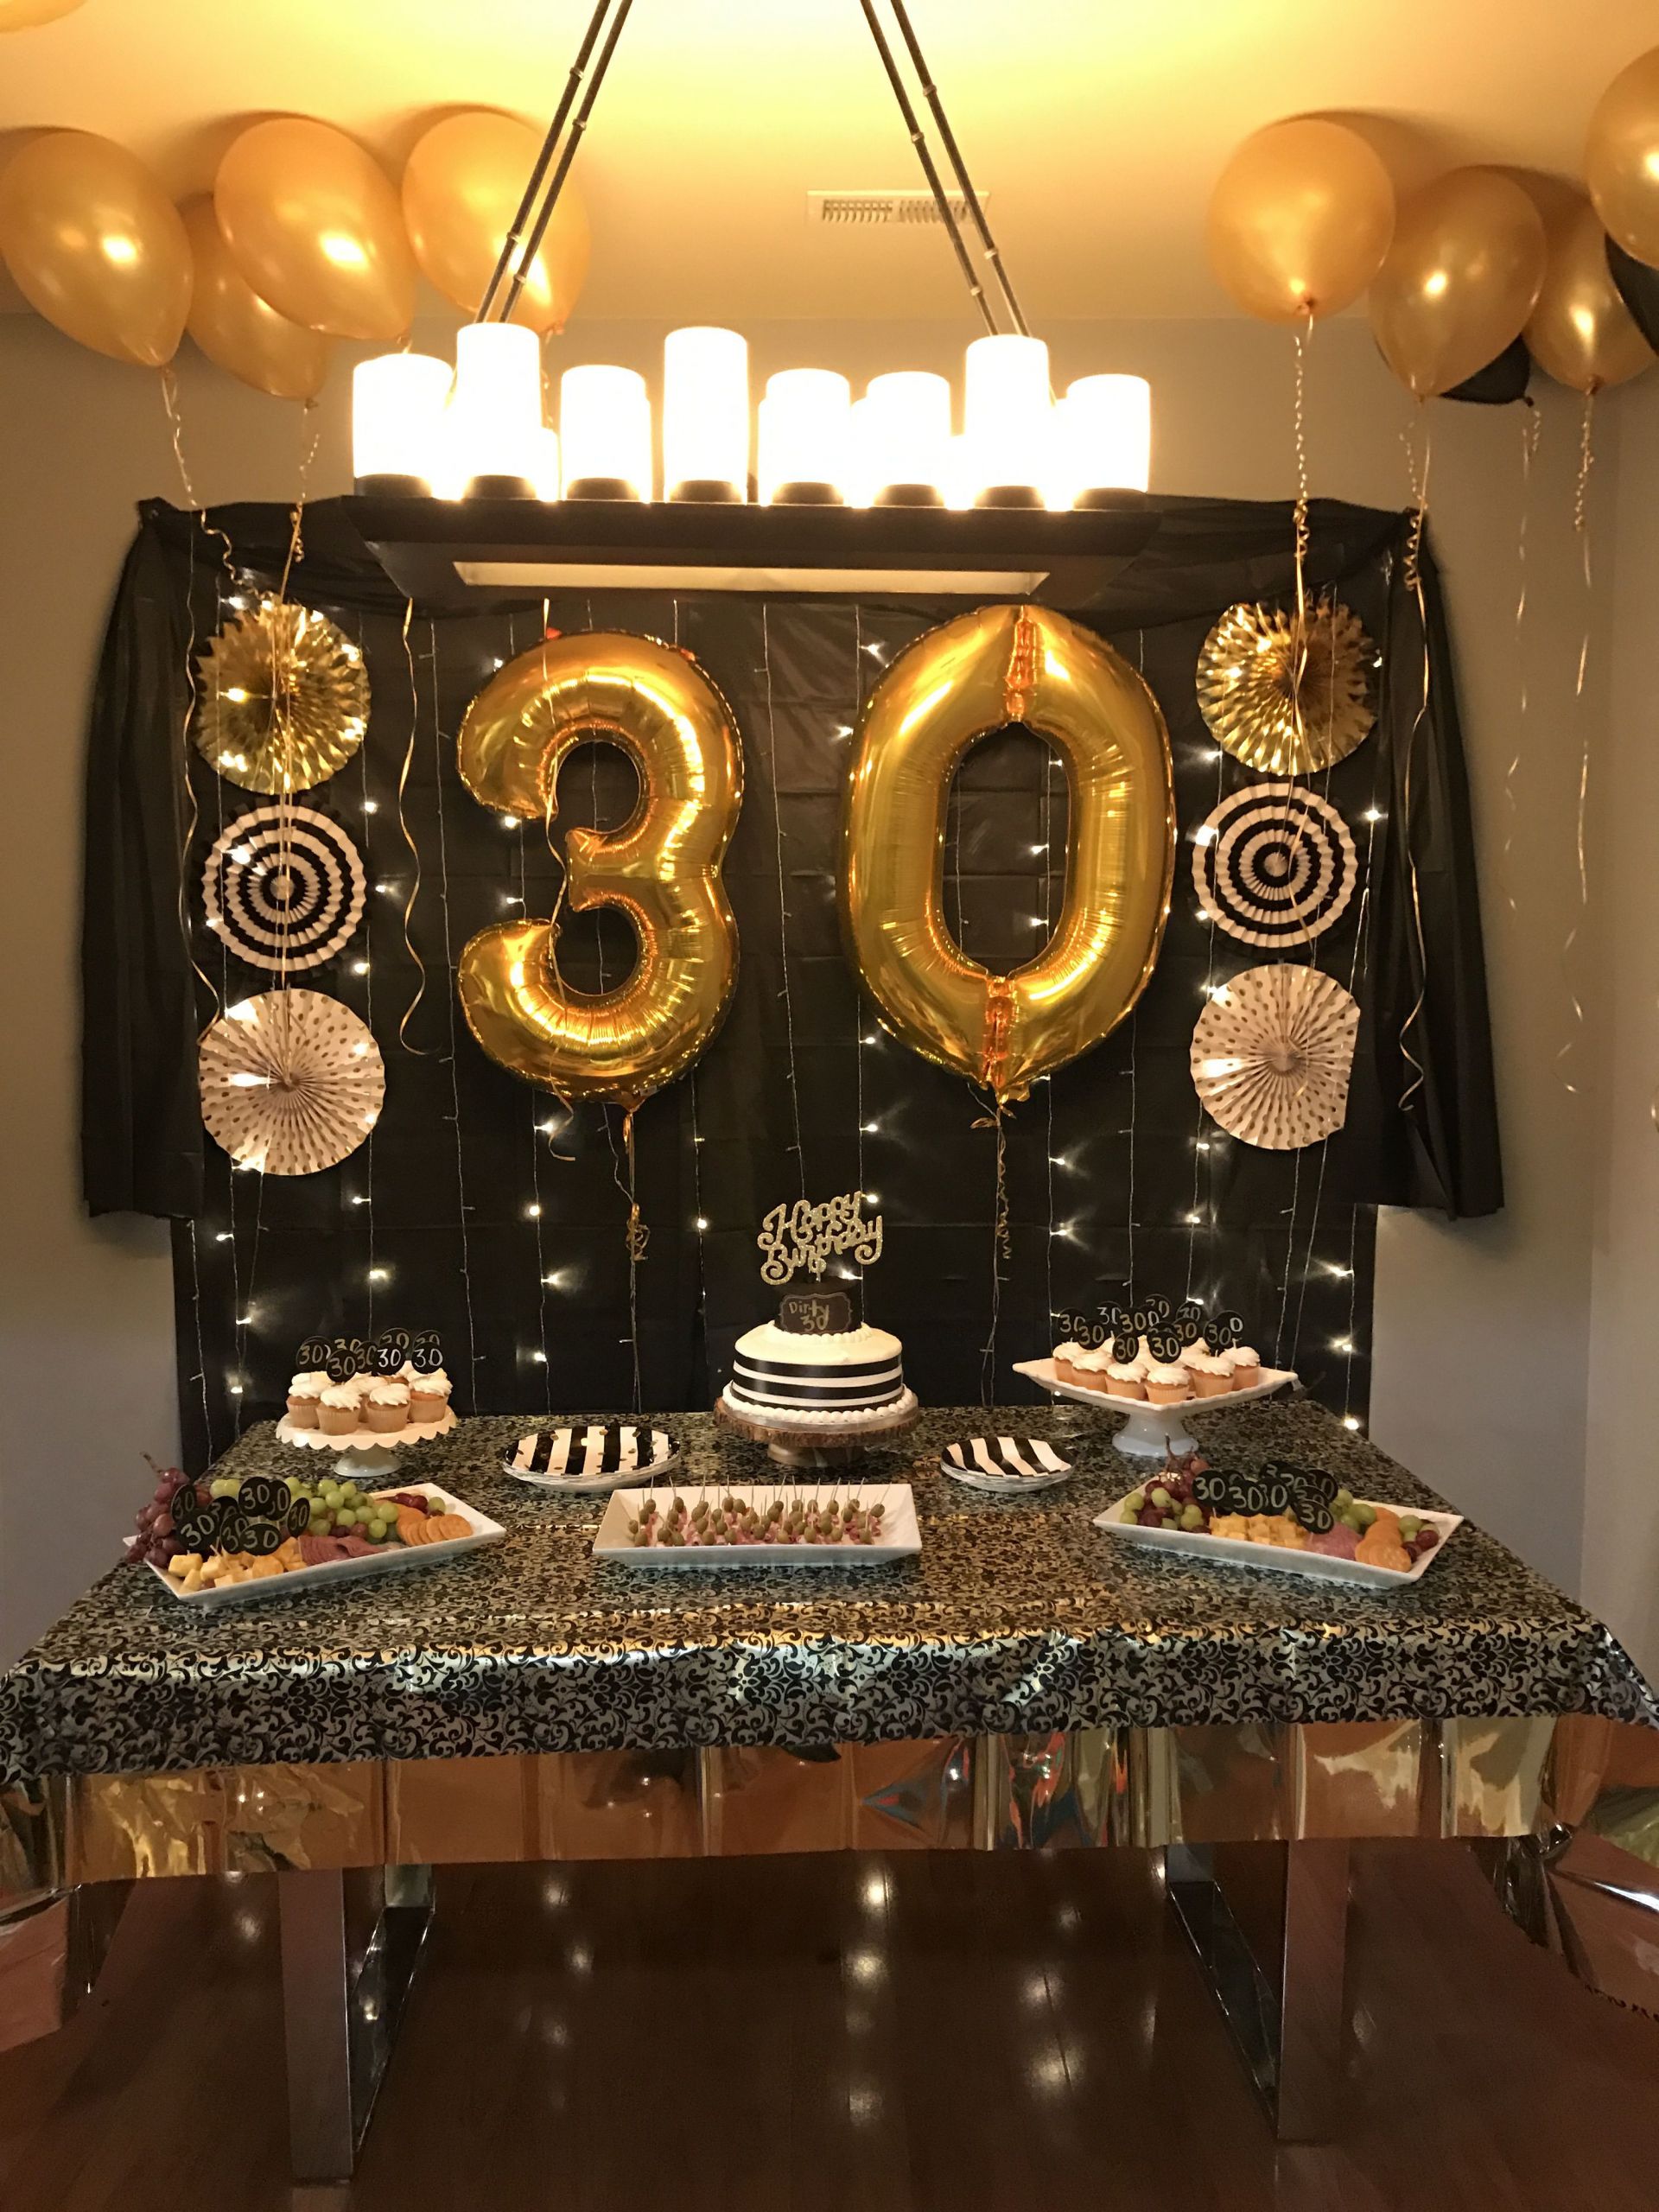 30th Birthday Decorations For Men
 Pin by Partydesignsbyvero on Party designs by vero